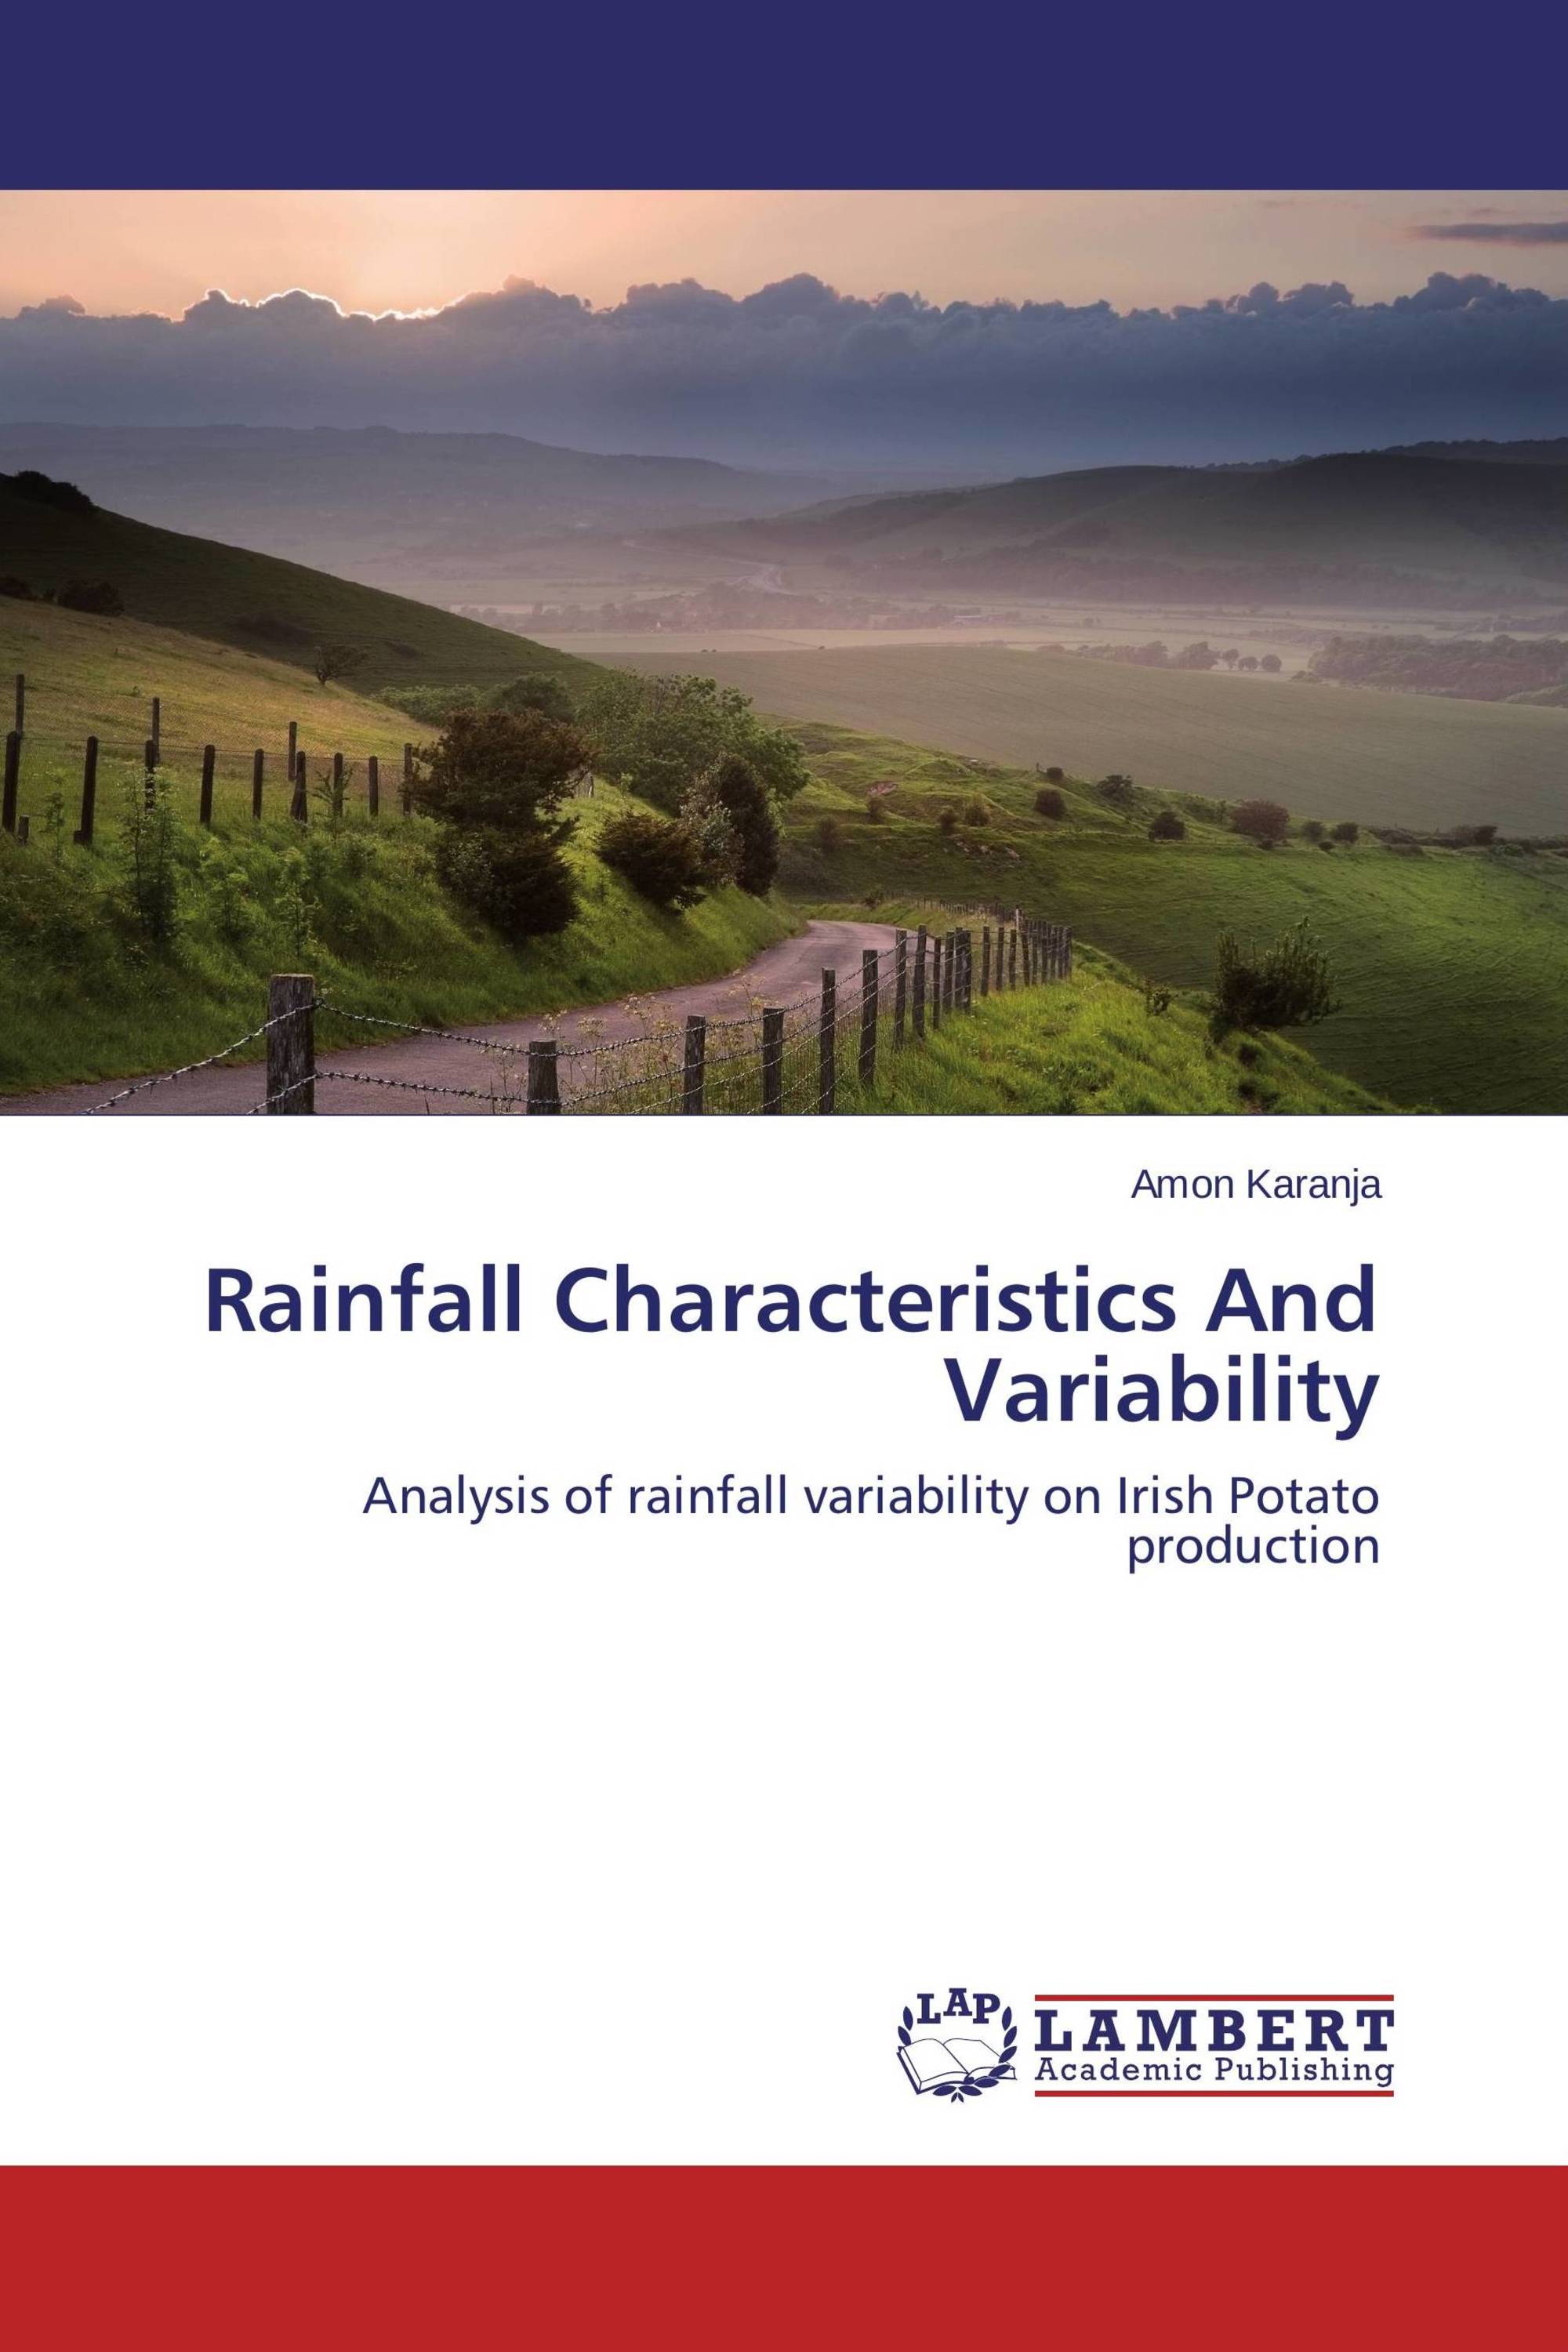 literature review on rainfall variability